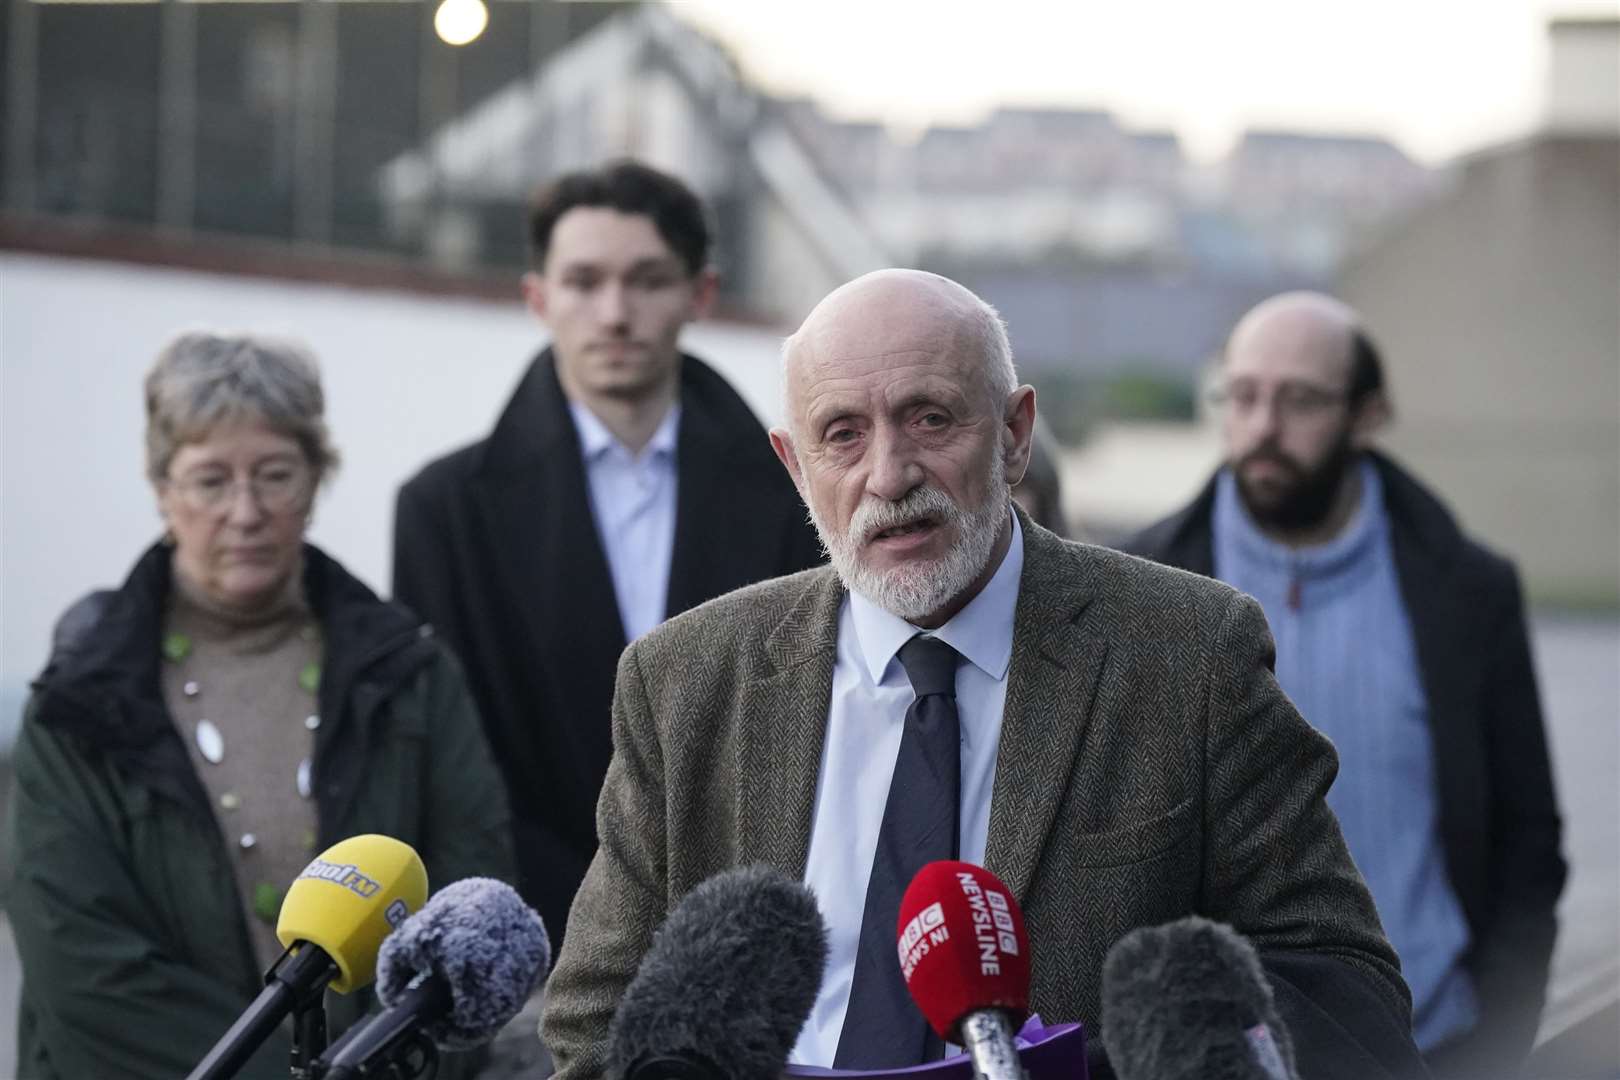 The couple’s son-in-law Charles Little speaking outside the inquest (Niall Carson/PA)